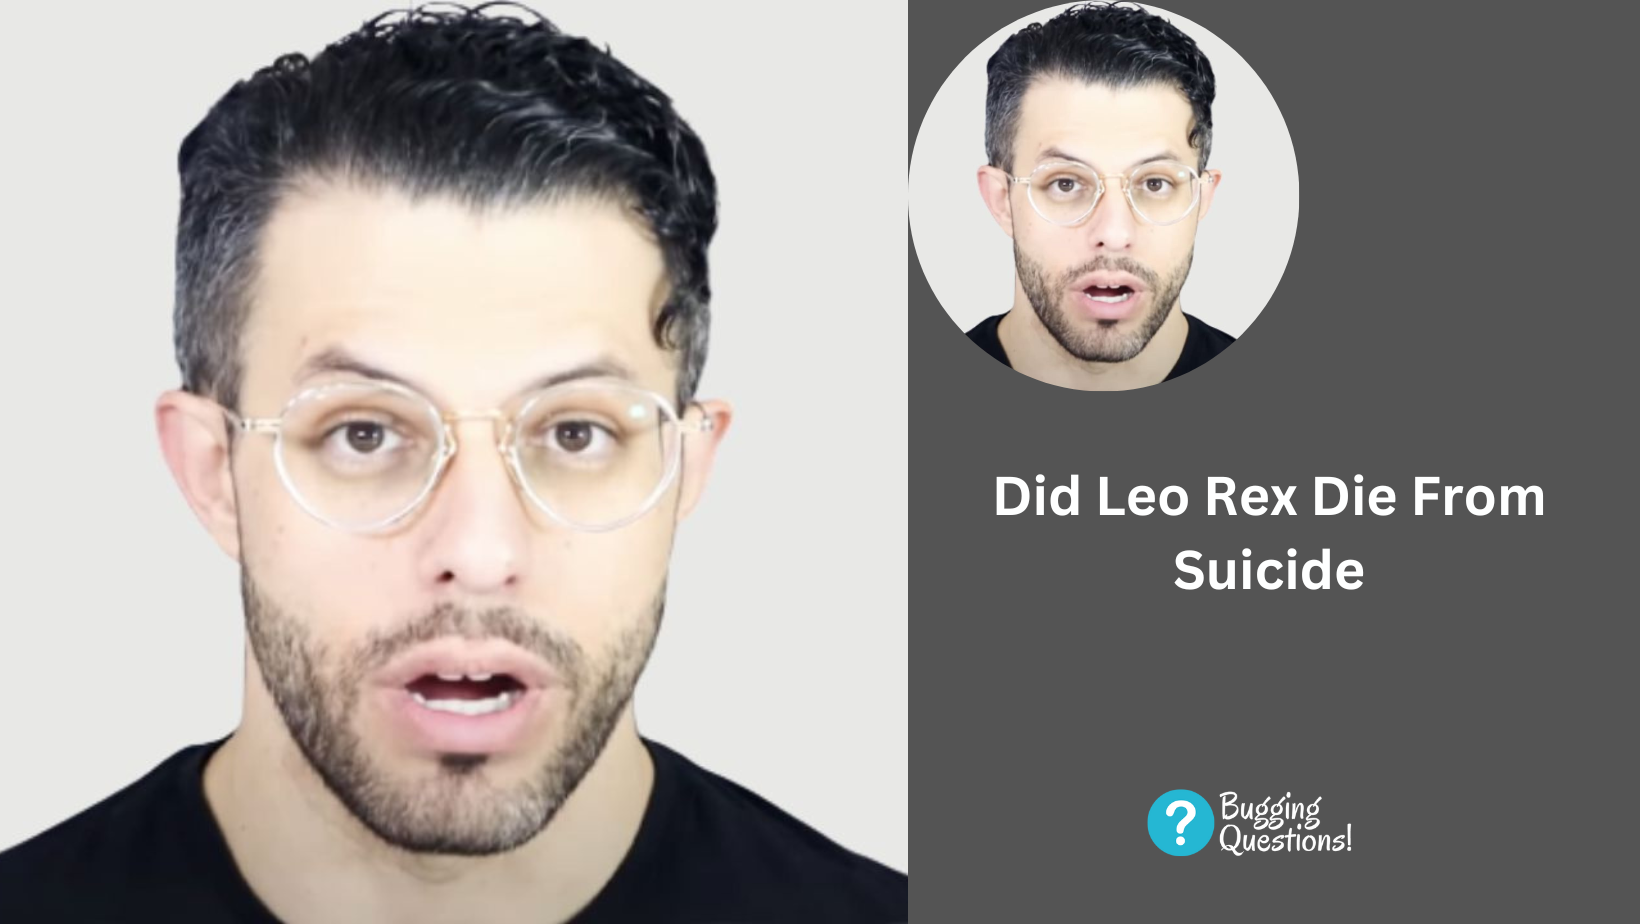 Did Leo Rex Die From Suicide?